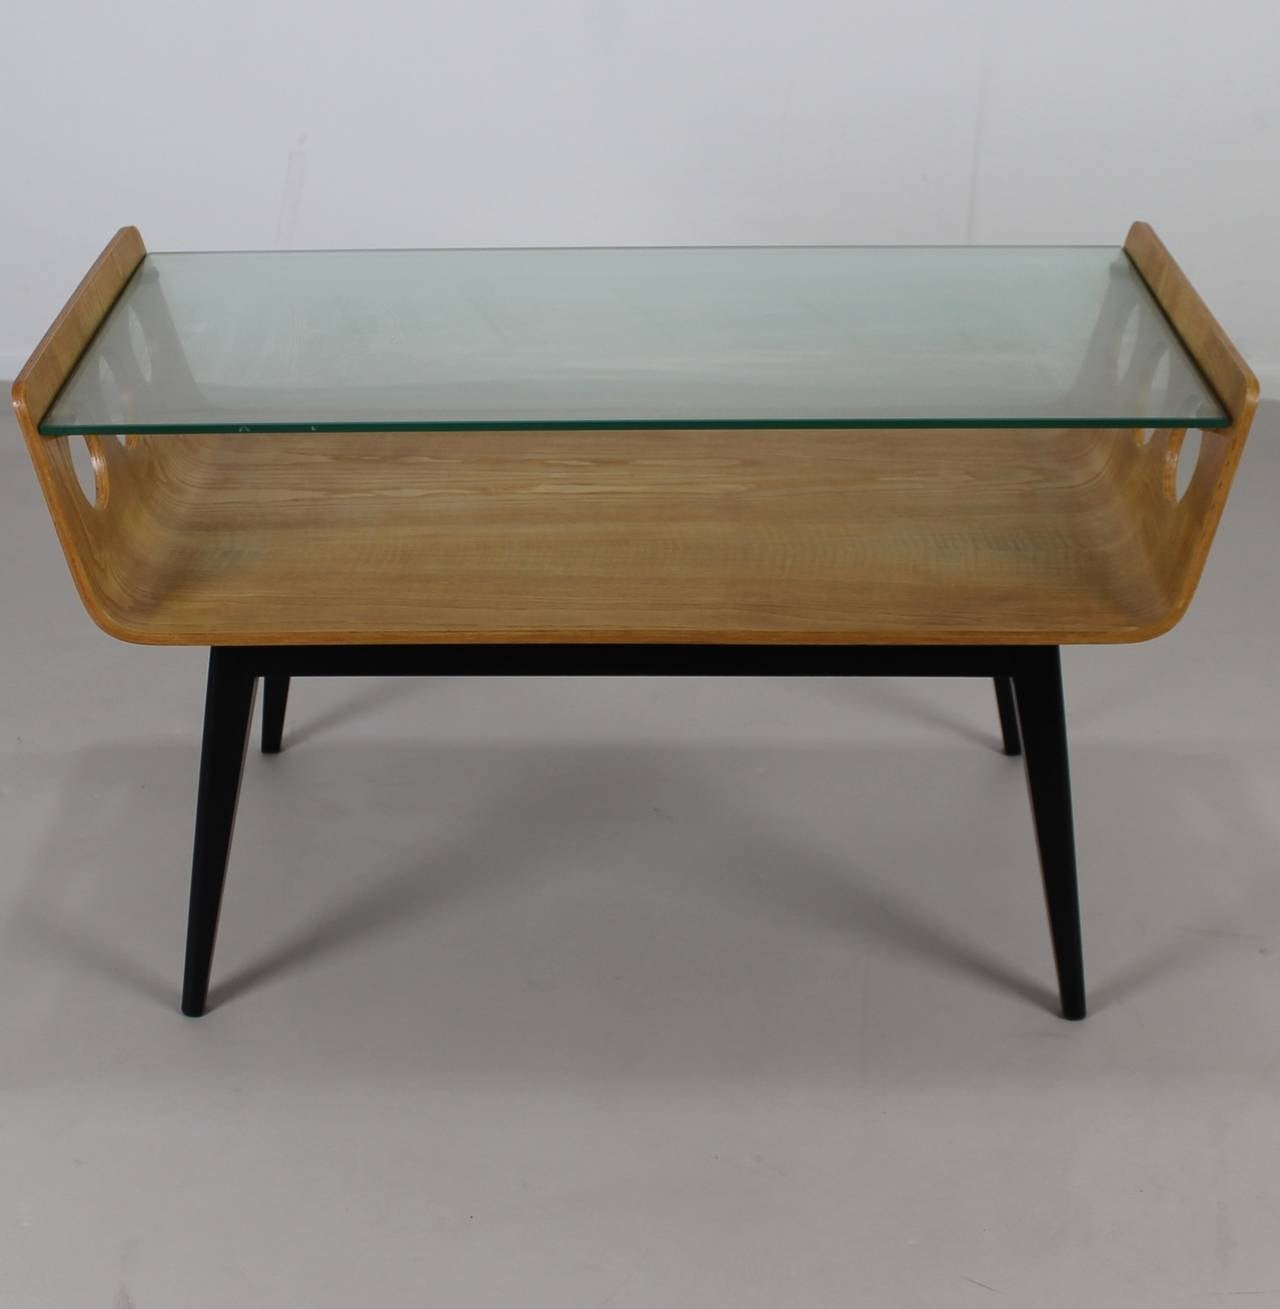 Dutch Design 1950s Bentwood Coffee Table with Glass Top For Sale 2